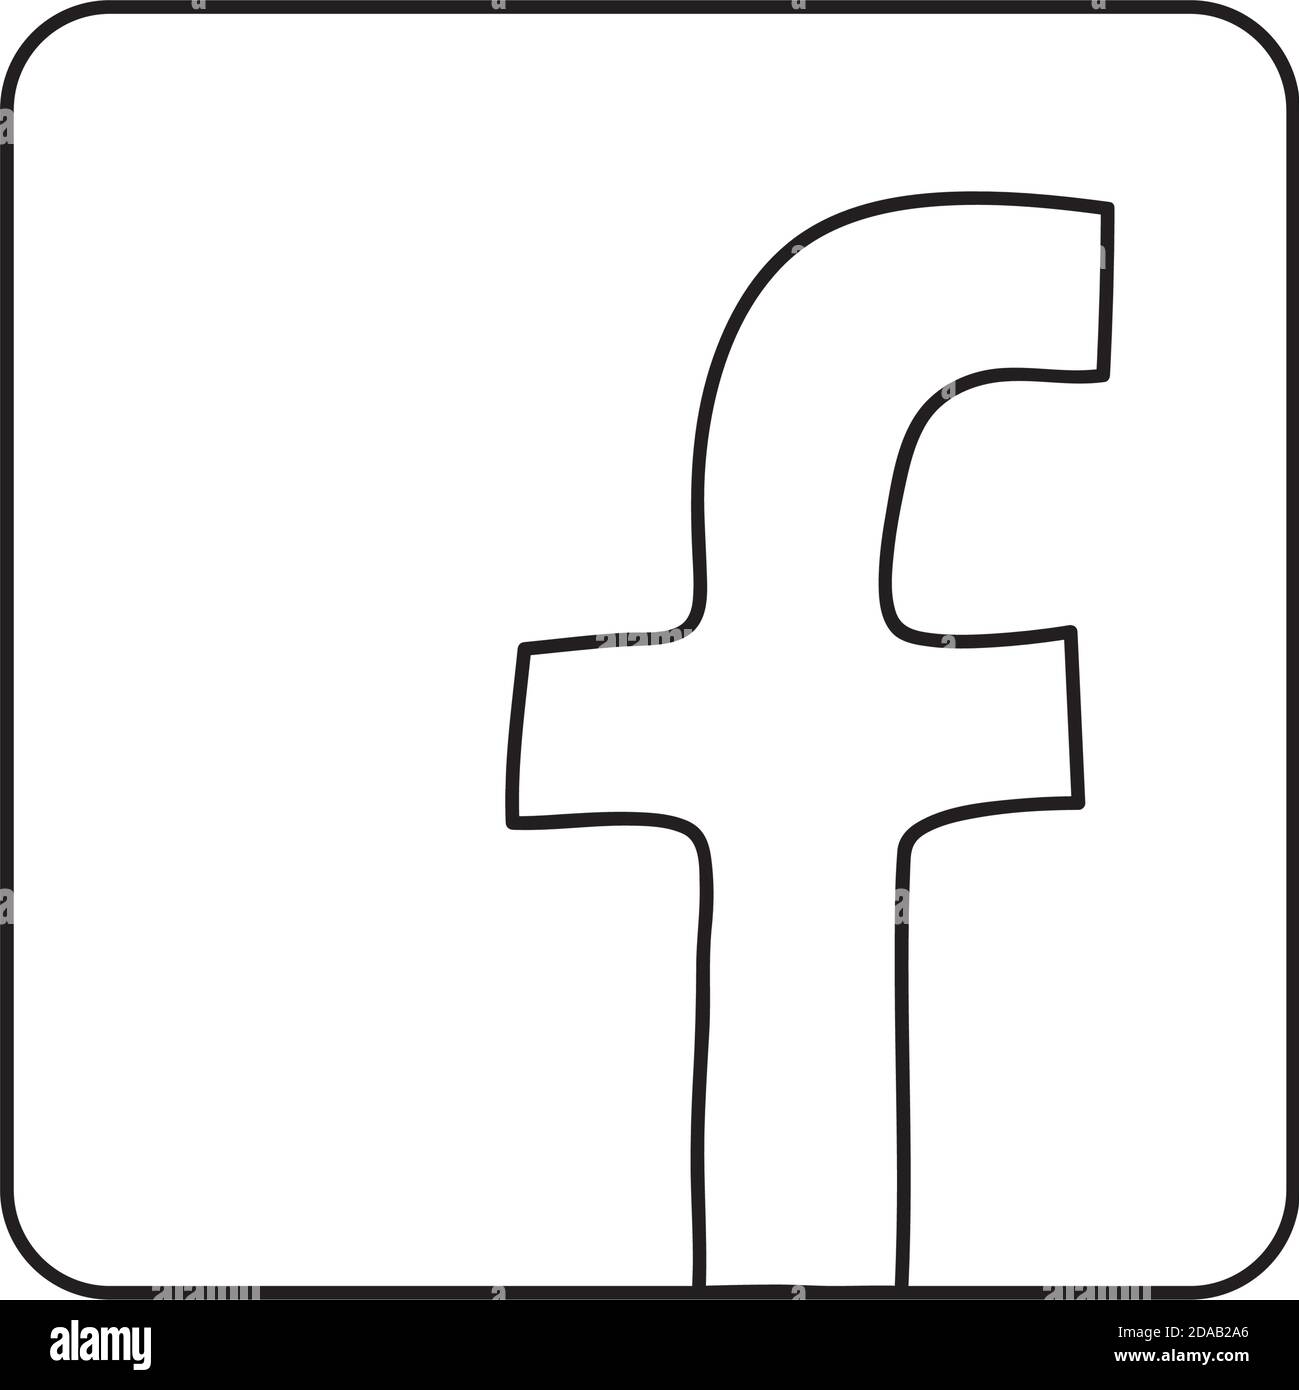 Facebook Icon Black And White Stock Photos Images Alamy